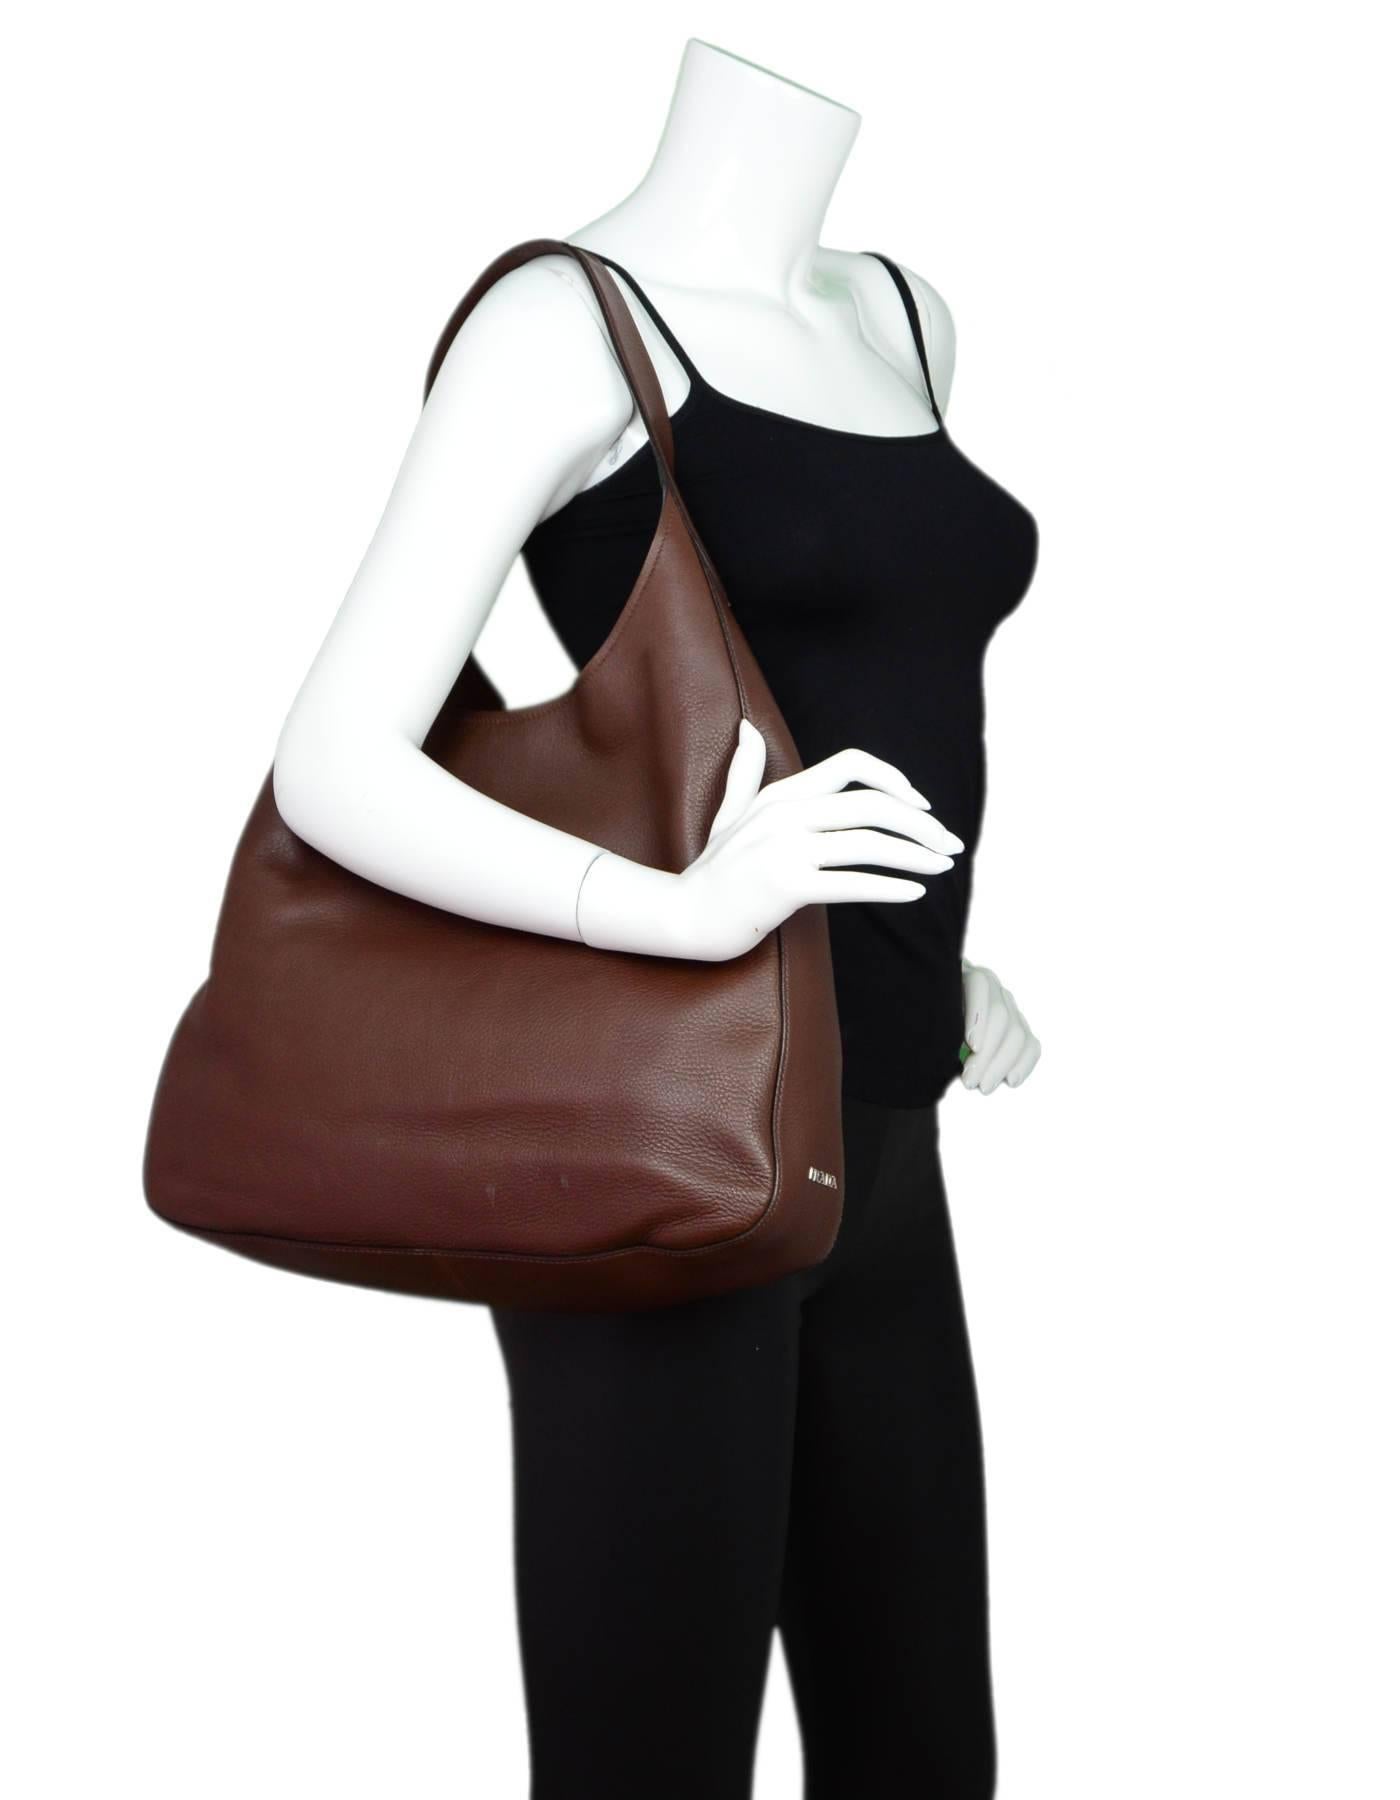 Prada Radica Brown Vitella Corsica Leather Hobo Bag

Made In: Italy
Color: Brown
Materials: Leather
Lining: Brown textile
Closure/Opening: Open top with center magnetic closure 
Exterior Pockets: One patch pocket
Interior Pockets: Wall pocket, zip